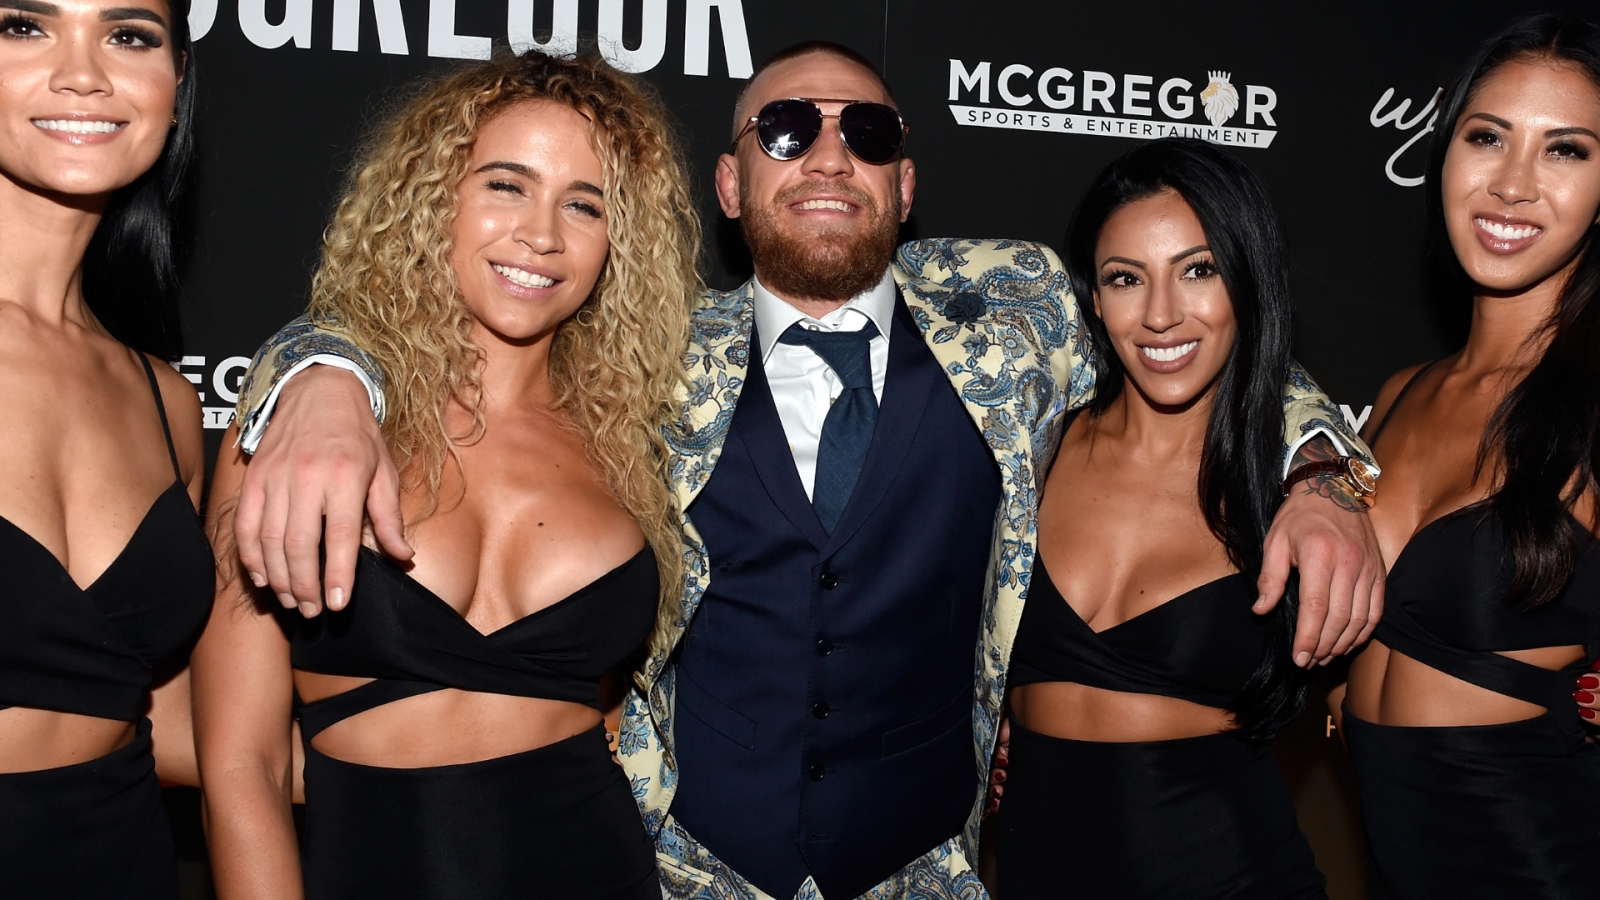 Rita Ora who? Conor McGregor shares loved-up private jet snap with 'keeper' Dee Devlin